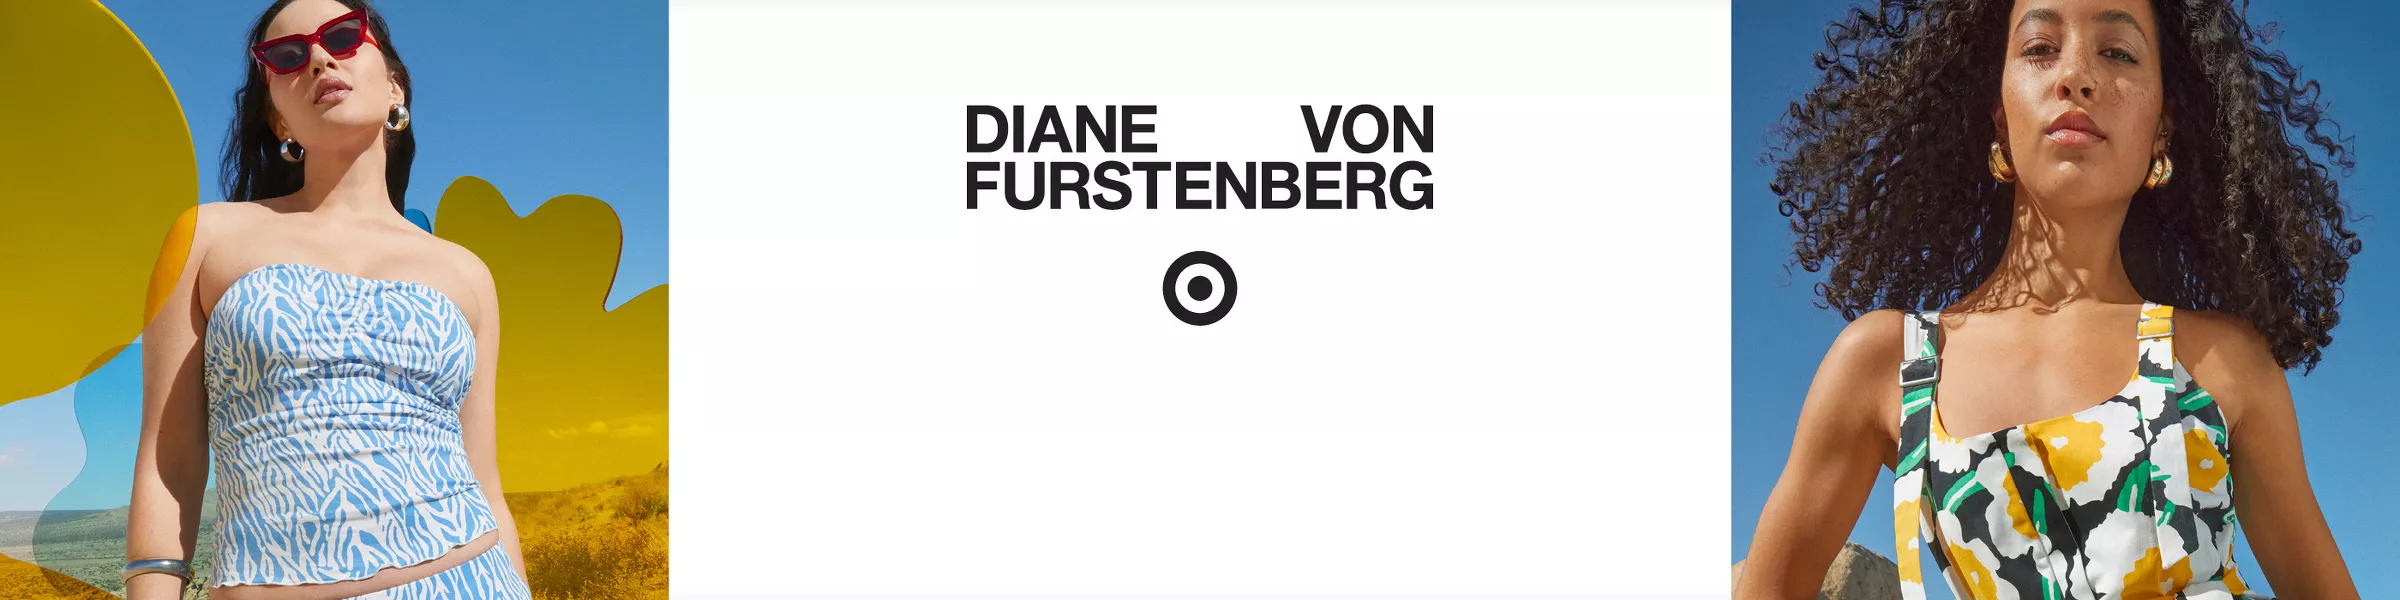 Video features women's clothing & accessories from the Diane von Furstenberg for Target collection.